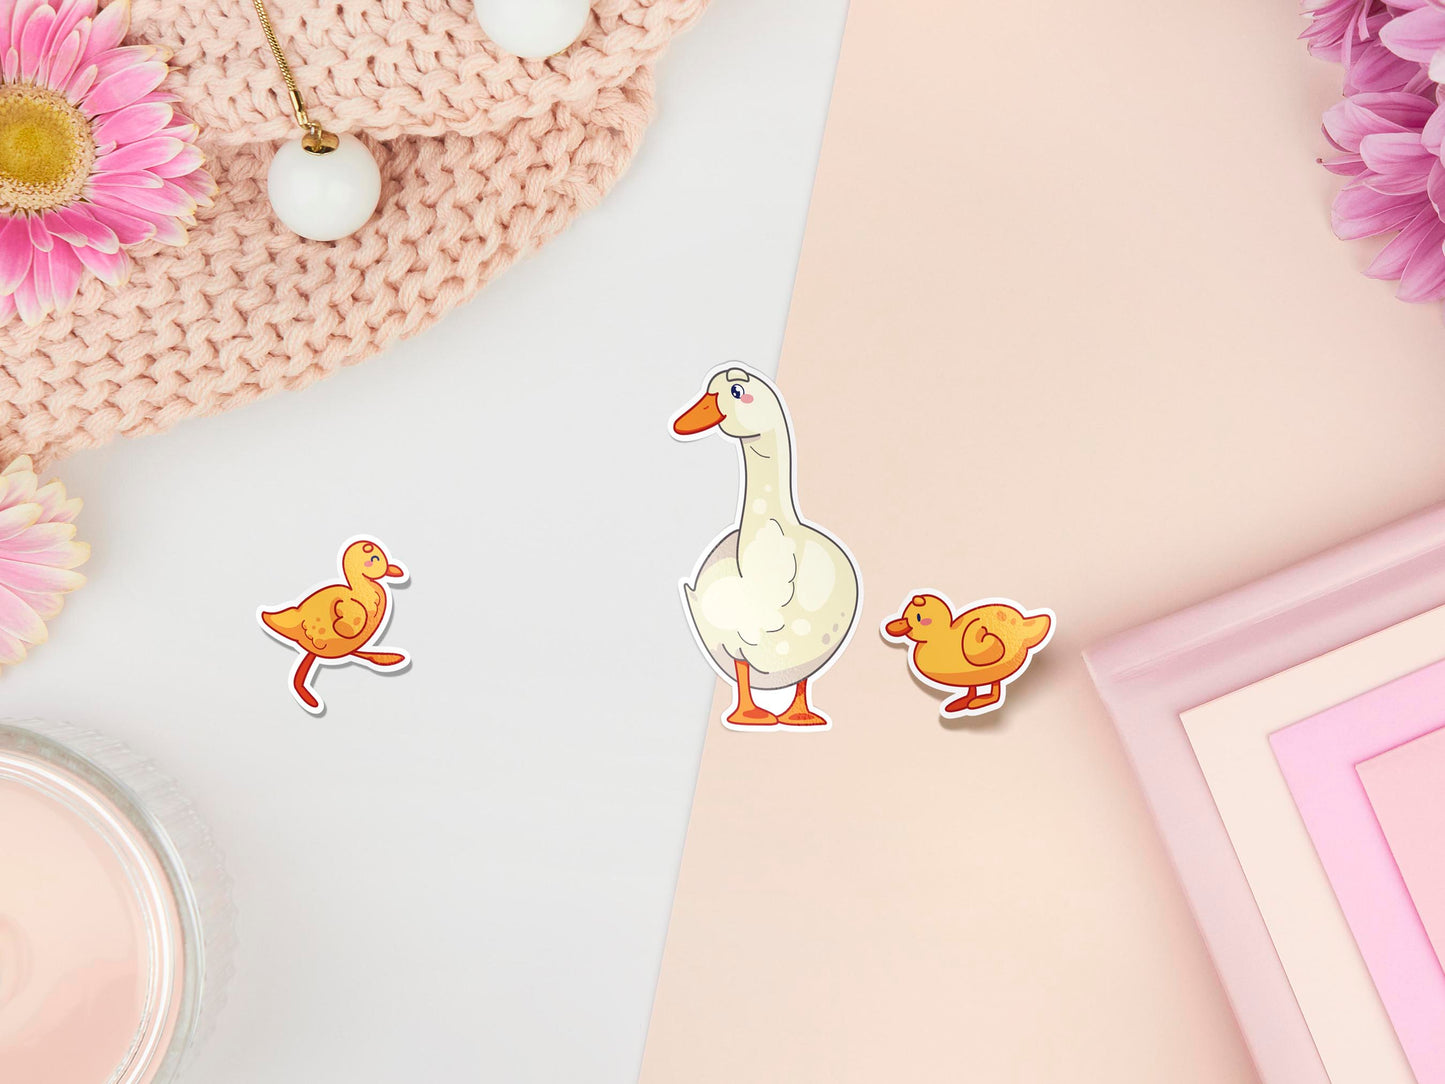 Three stickers of digitally illustrated cartoon ducks, one is a white adult duck the other are two small yellow ducklings